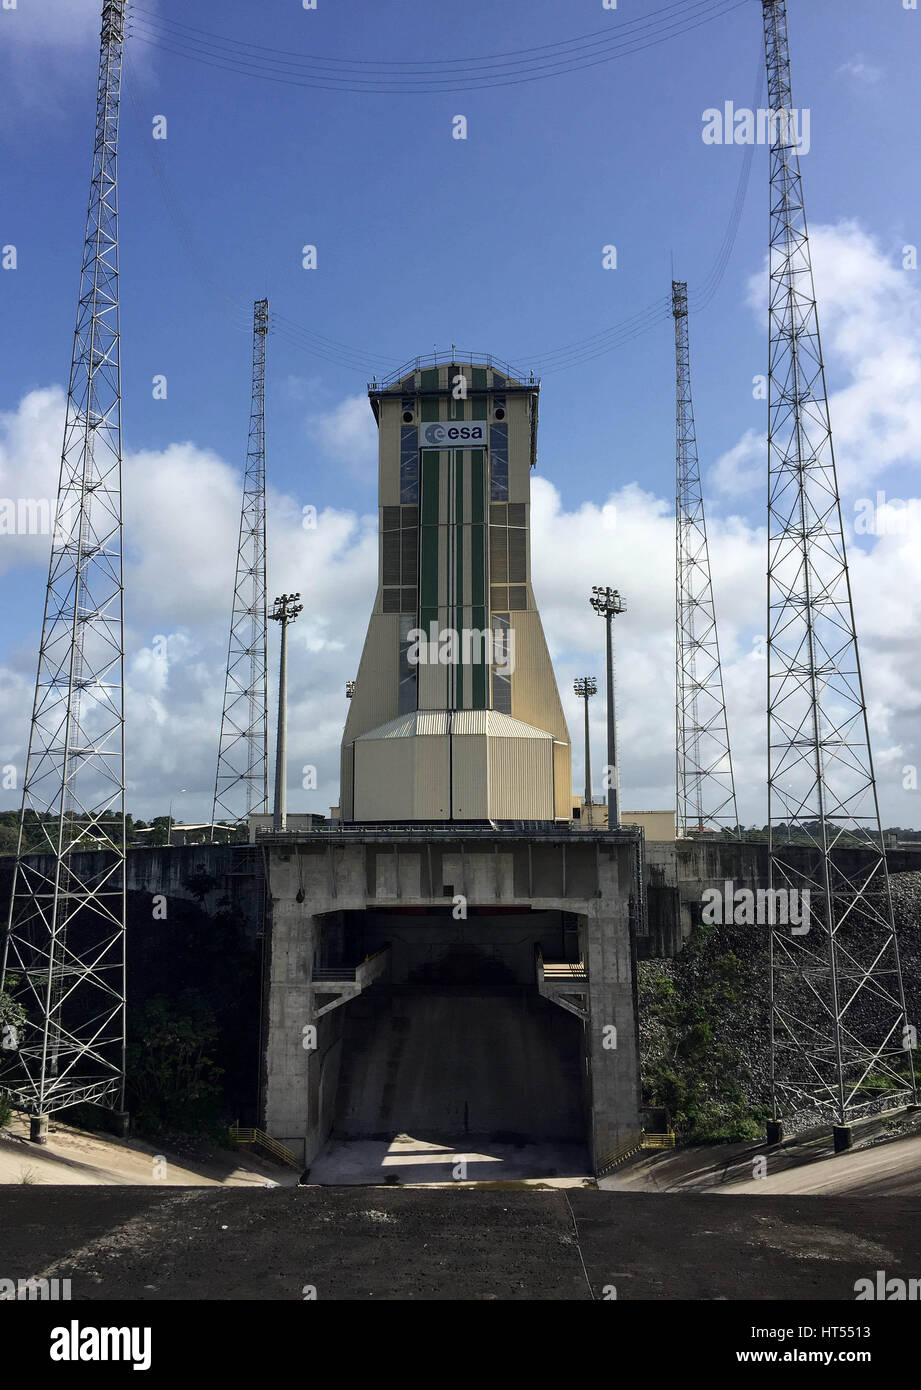 Soyuz rocket launch pad at the European spaceport at Kourou, French Guiana. Stock Photo